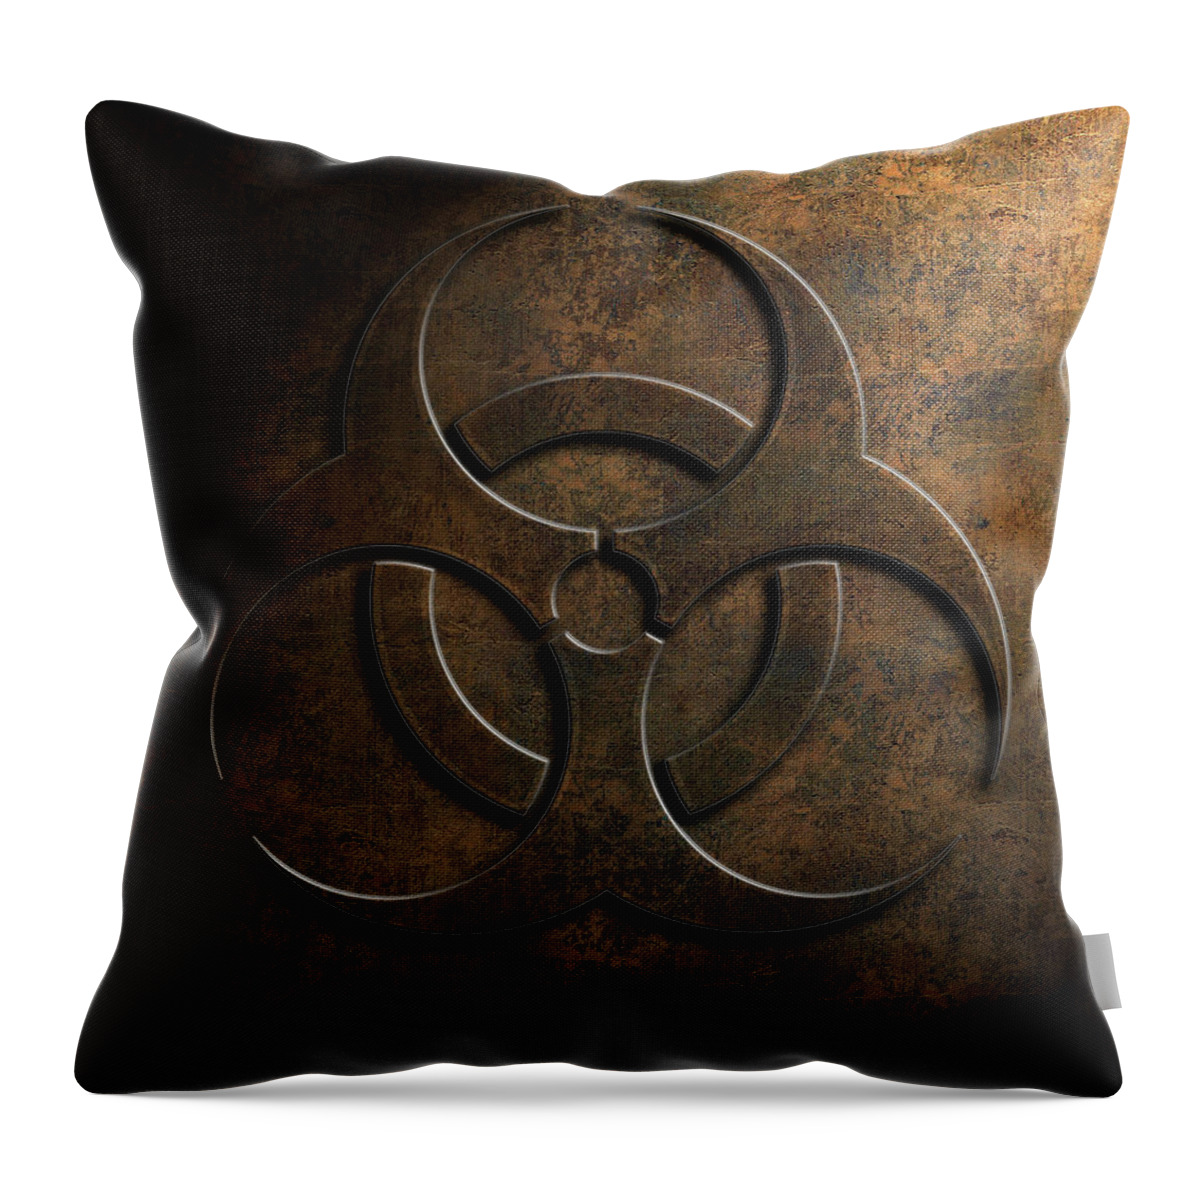 Aged Throw Pillow featuring the digital art Biohazard Symbol Stone Texture Repost by Brian Carson